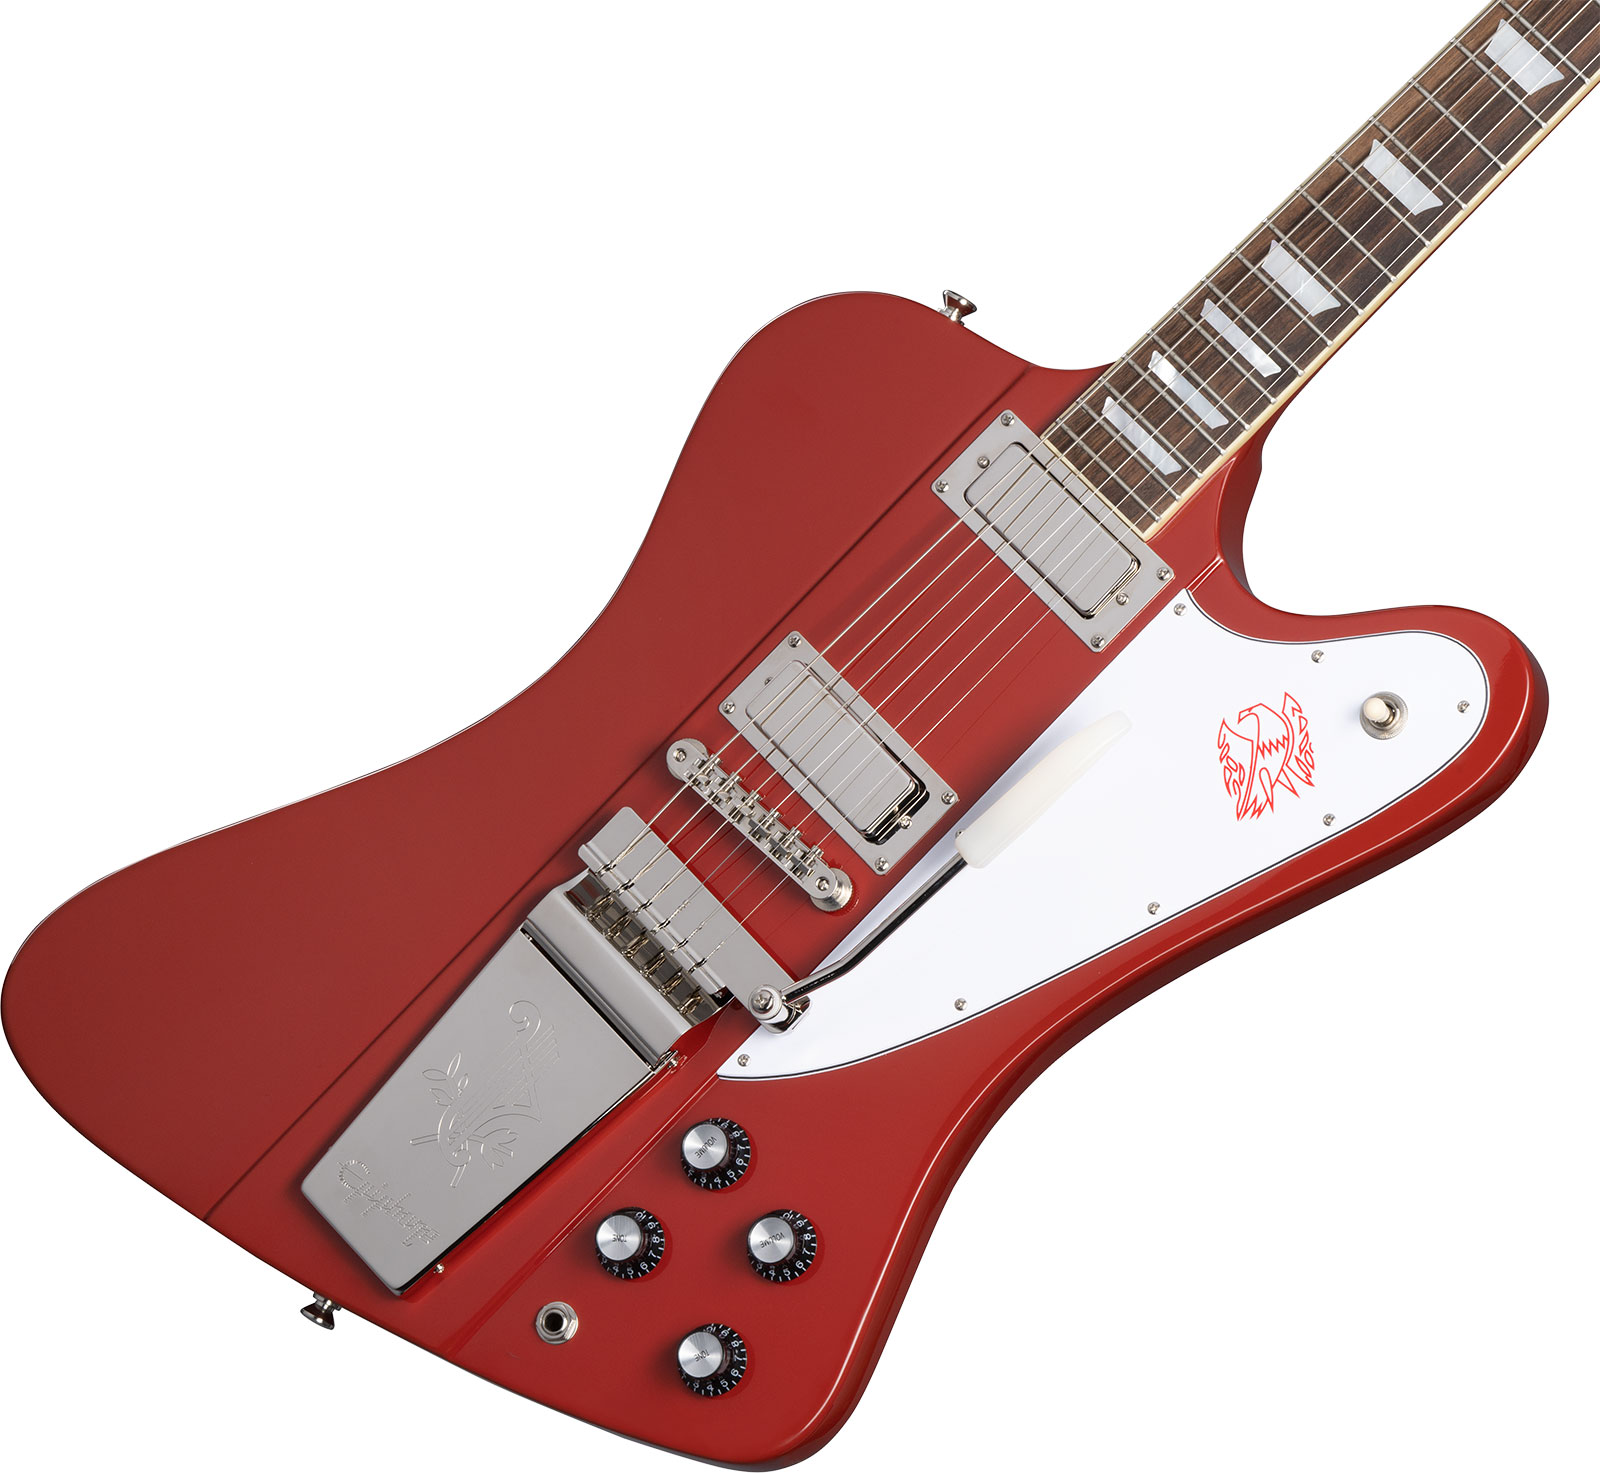 Epiphone Firebird V 1963 Maestro Vibrola Inspired By Gibson Custom 2mh Trem Lau - Ember Red - Guitare Électrique RÉtro Rock - Variation 3